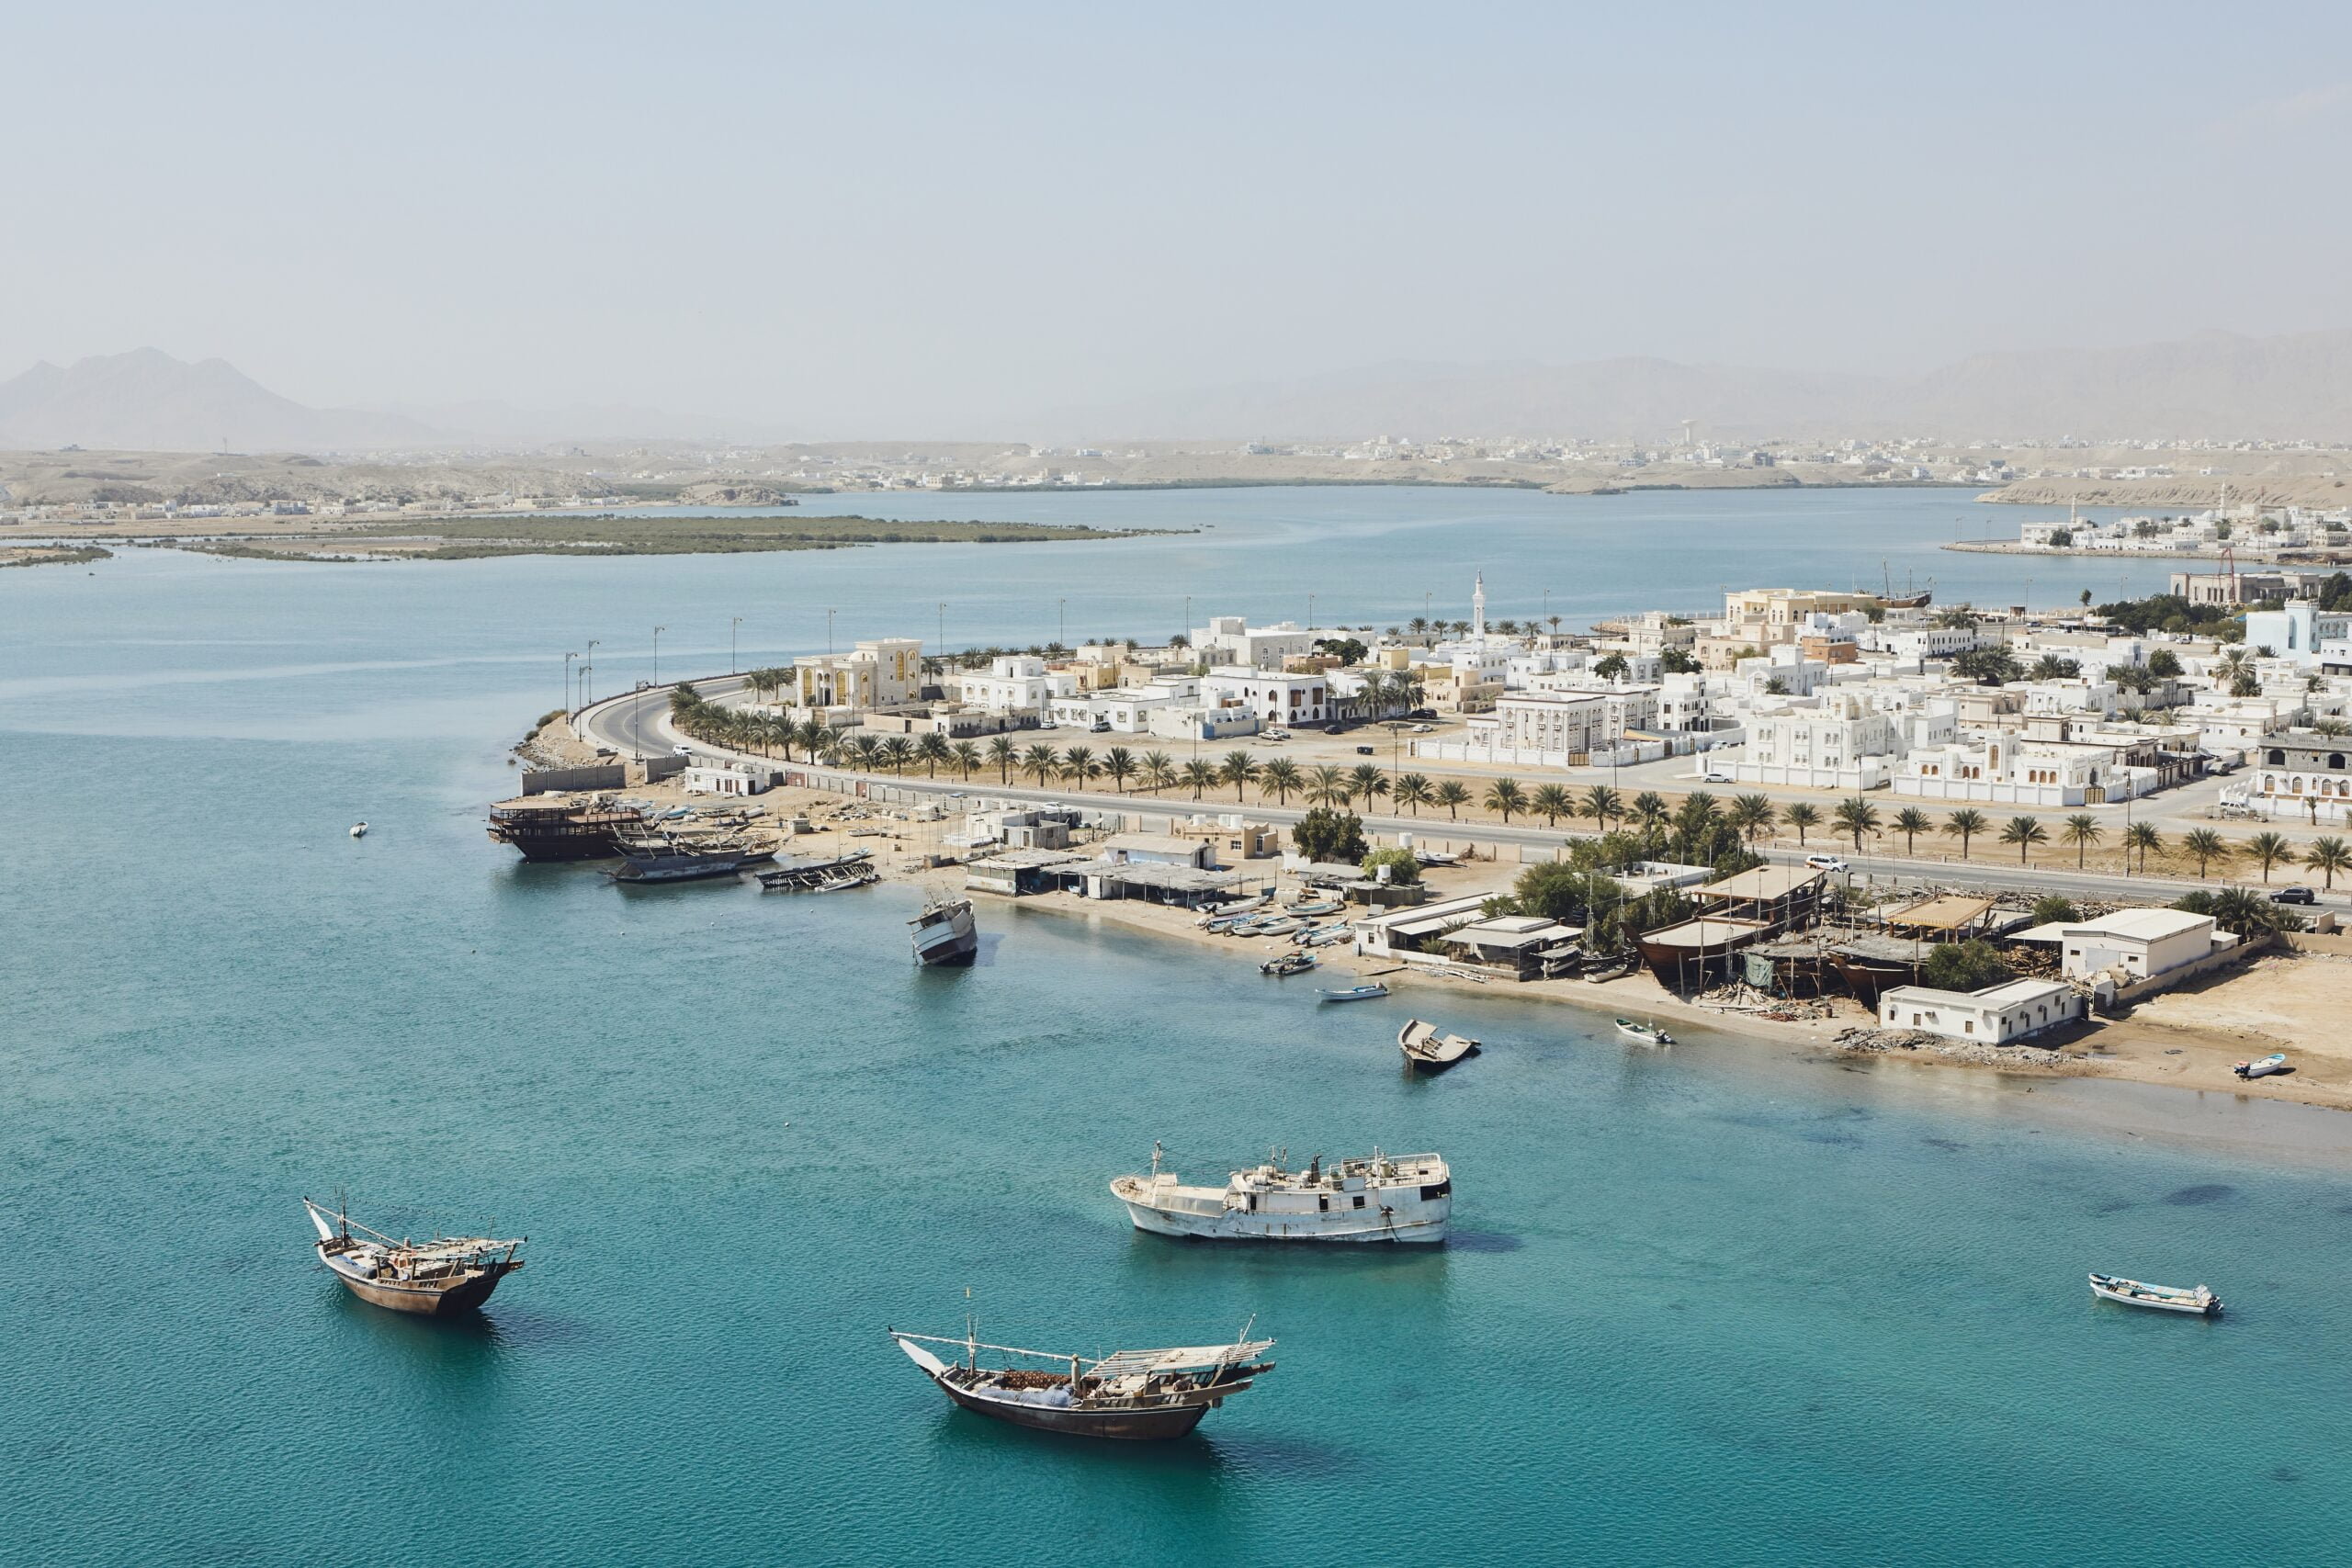 Bay with traditional wooden Dhow ships. Coastline of old city Sur in Sultanate of Oman.